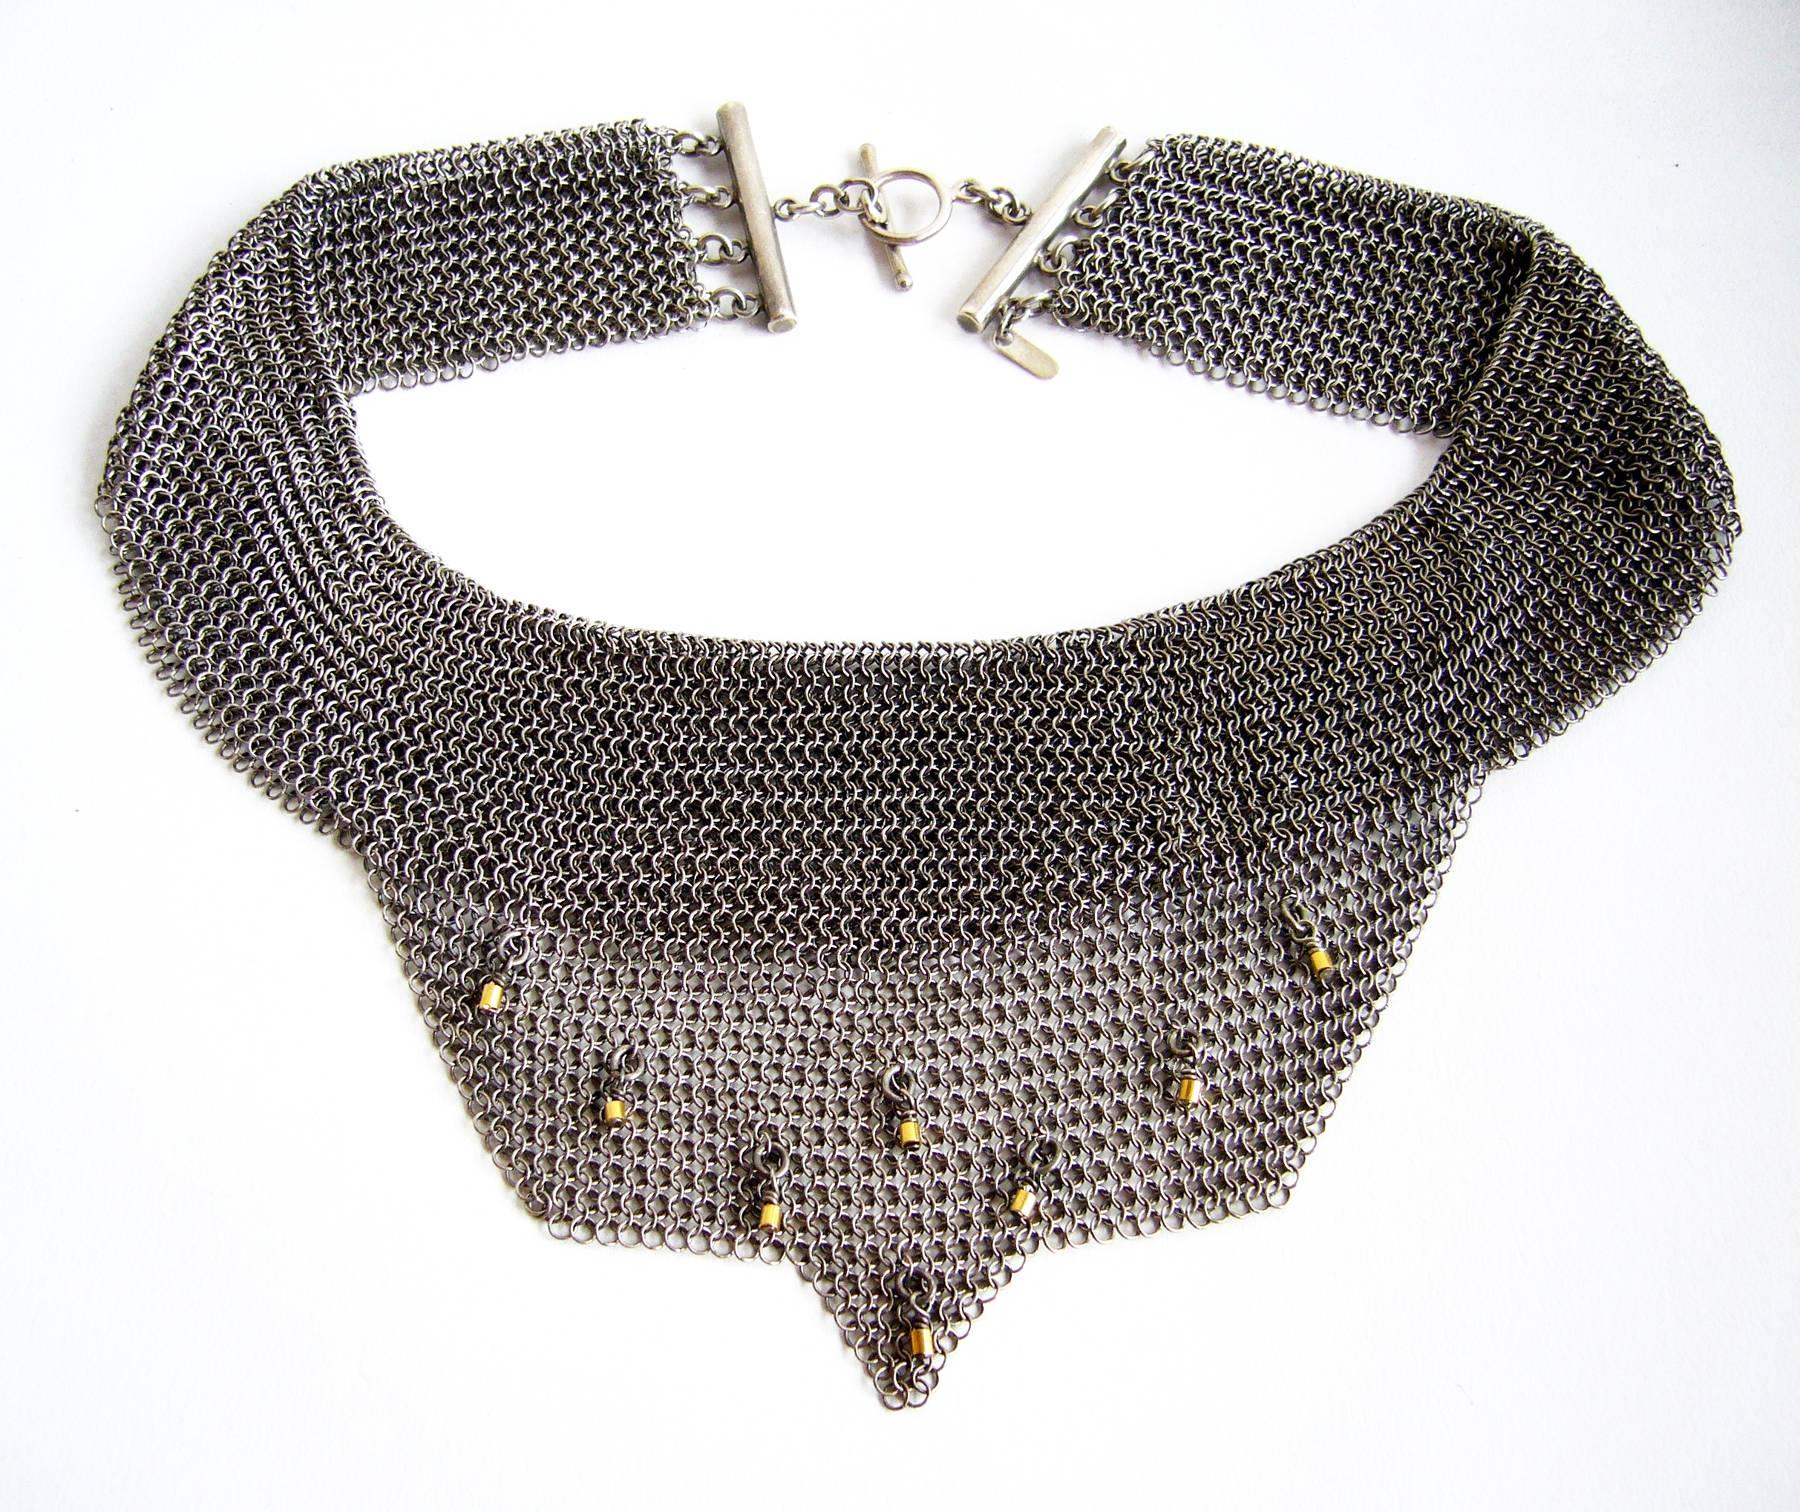 Allison Stern sterling silver chain maille mesh necklace embellished with 18k gold accents on the bib section.  Necklace has a wearable neck length of 16.5